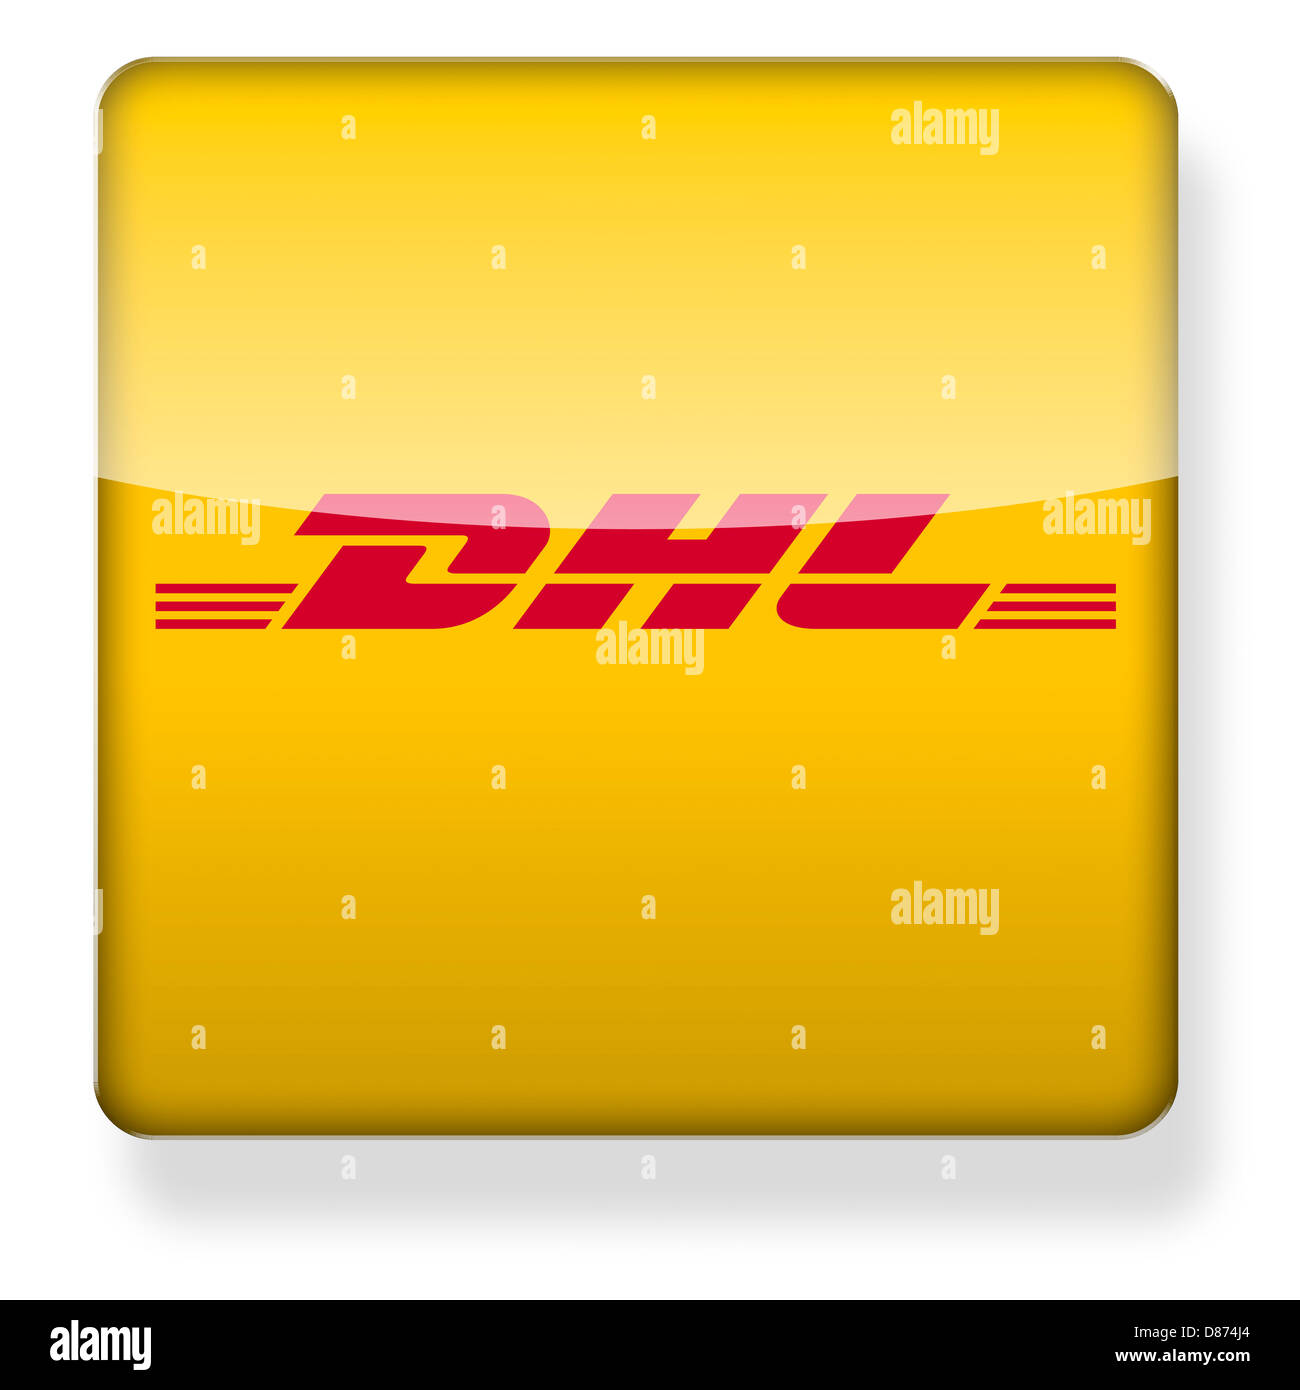 DHL logo as an app icon. Clipping path included. Stock Photo